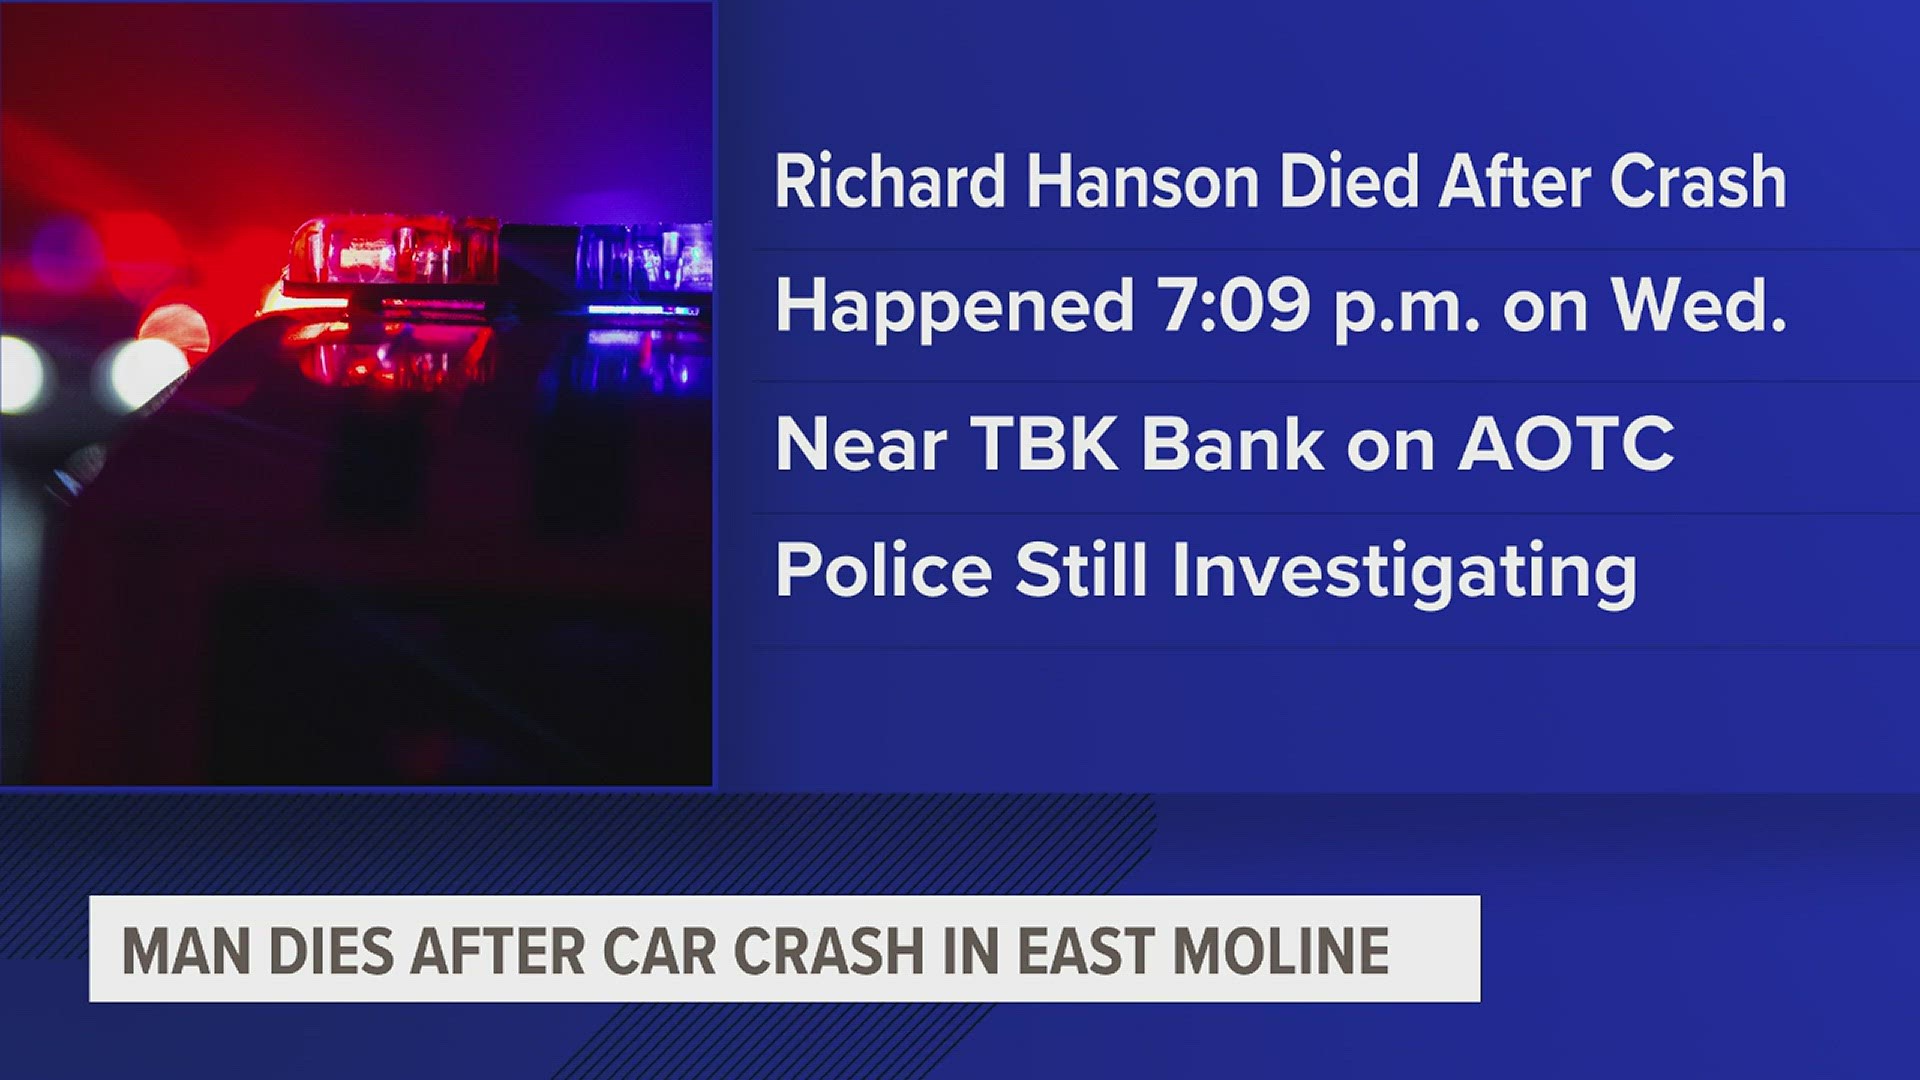 The victim has been identified as 56-year-old Richard Hanson.